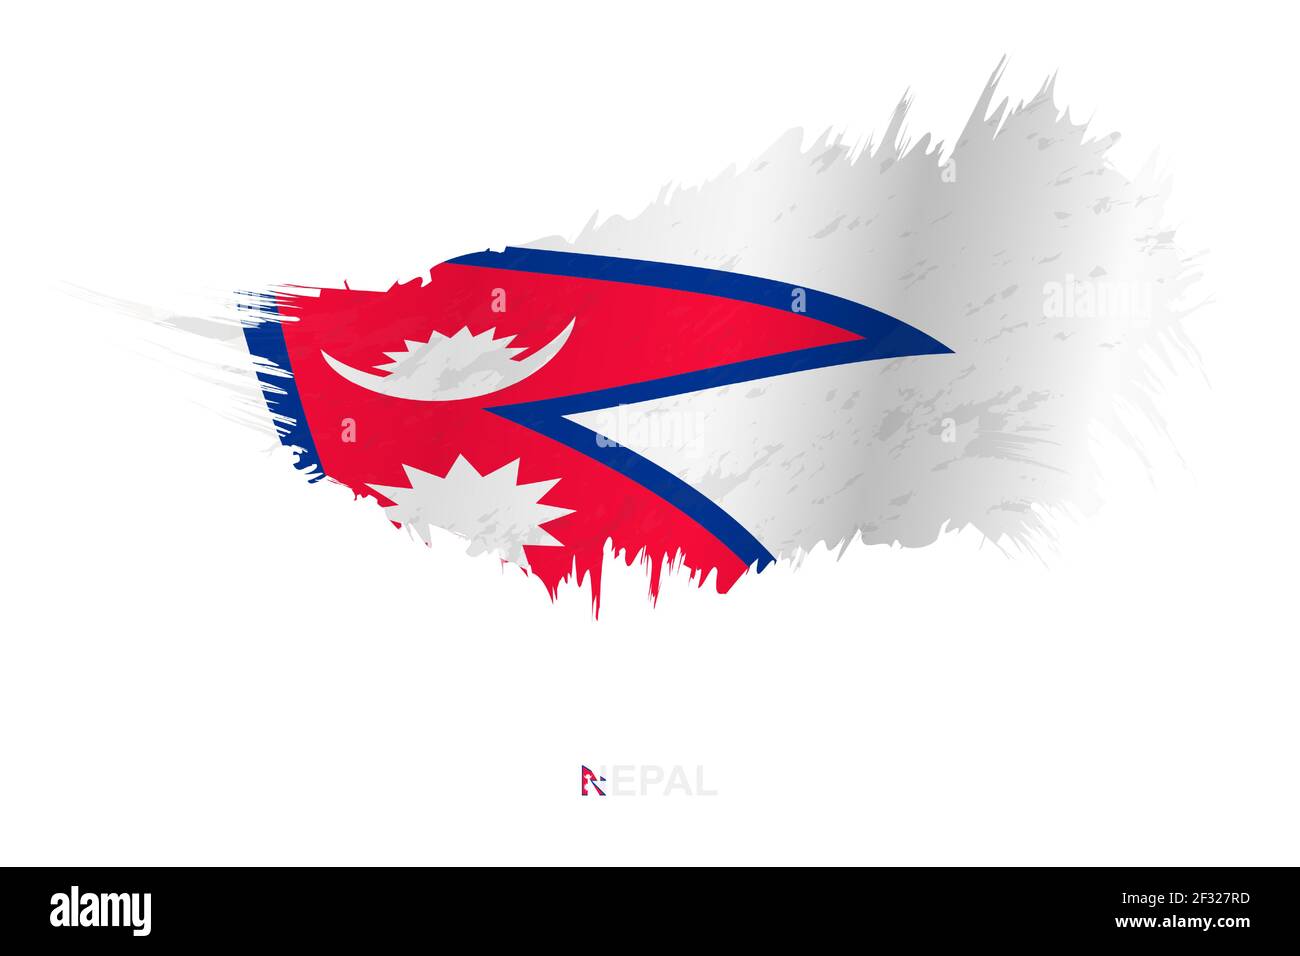 Flag of Nepal in grunge style with waving effect, vector grunge brush stroke flag. Stock Vector